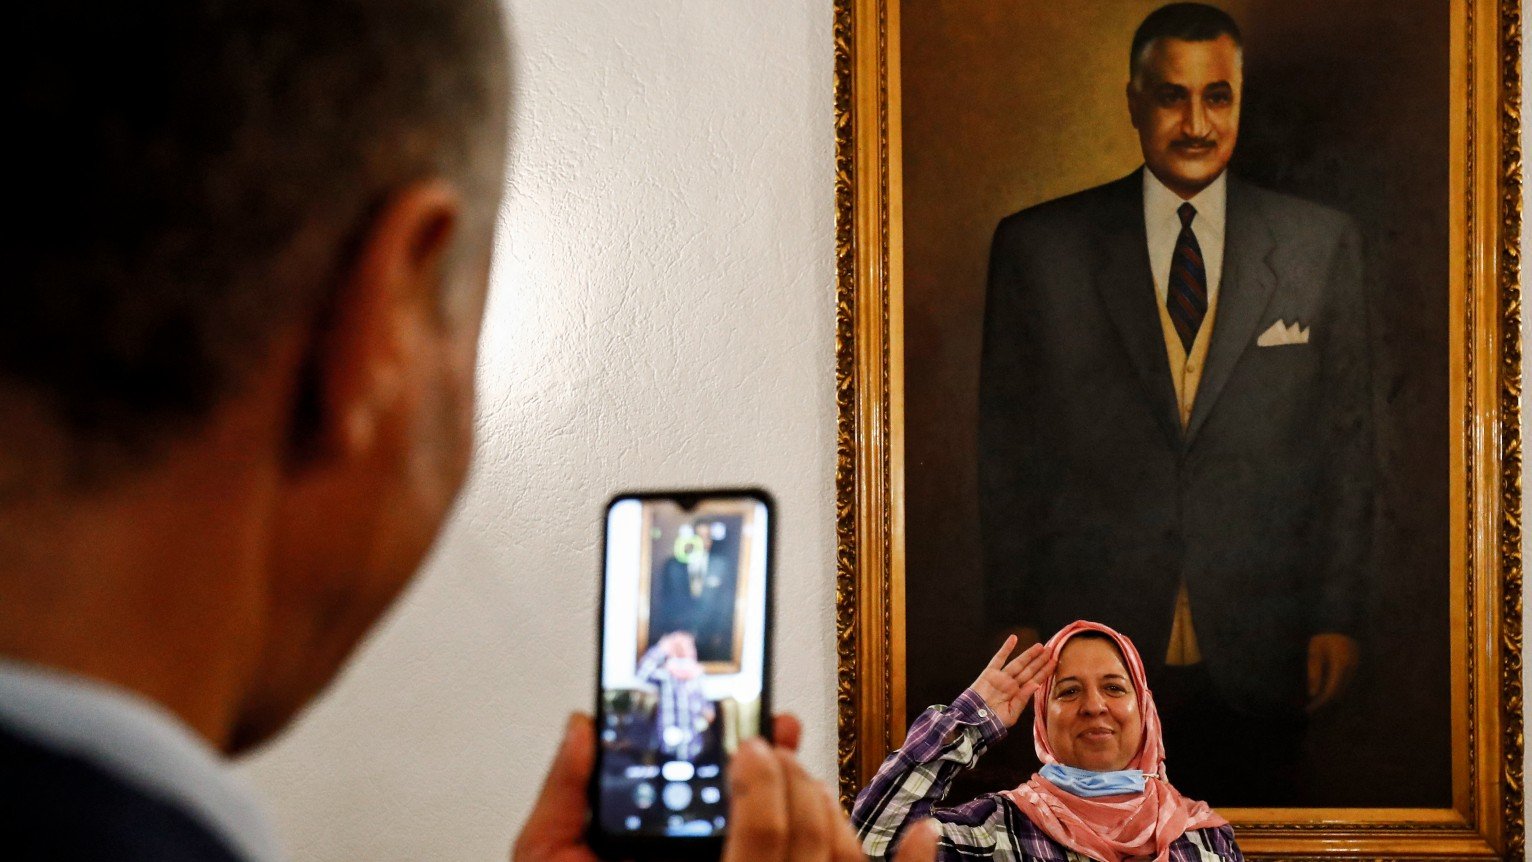 A man uses his phone to photograph a woman giving a salute as she poses before a painting depicting Egypt's late president Gamal Abdel Nasser at his mausoleum in Cairo on 28 September, 2020 (AFP)